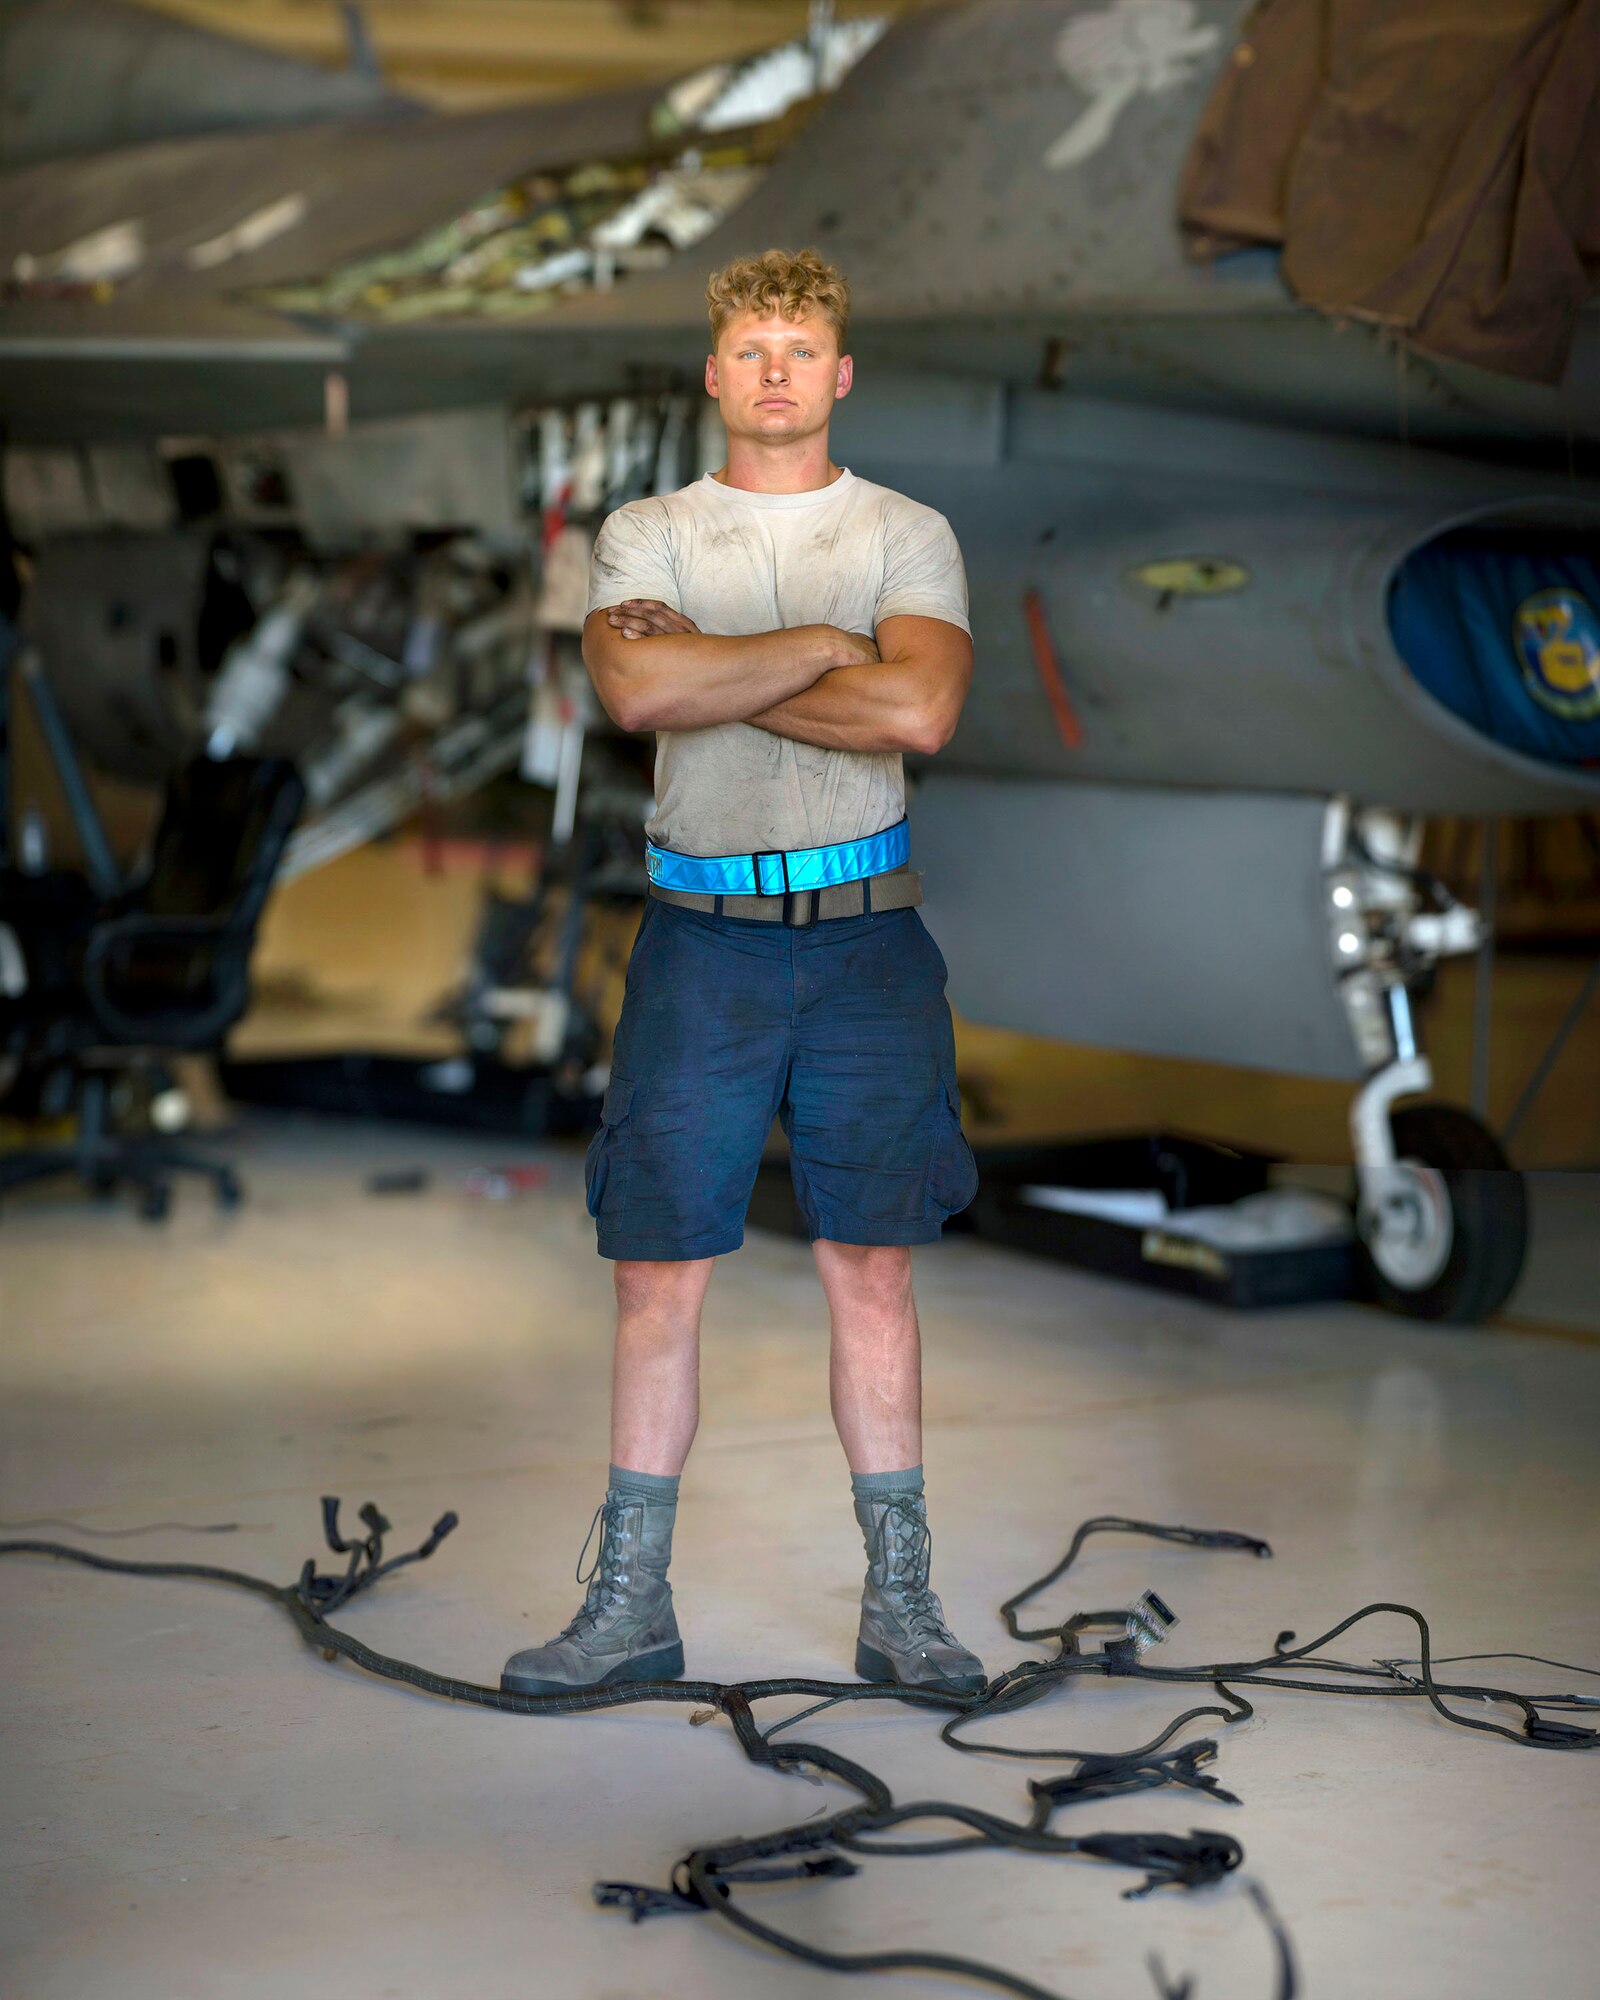 Senior Airman Brian Raatz, 311th Aircraft Maintenance Unit F-16 Viper crew chief poses for a photo, June 4, 2020, on Holloman Air Force Base, N.M. Three Airmen from the 311th AMU are replacing 11 wire harnesses throughout the plane that range up to 90 feet of wiring, which can take up to three months to repair. (U.S. Air Force photo illustration by Staff Sgt. Christine Groening)